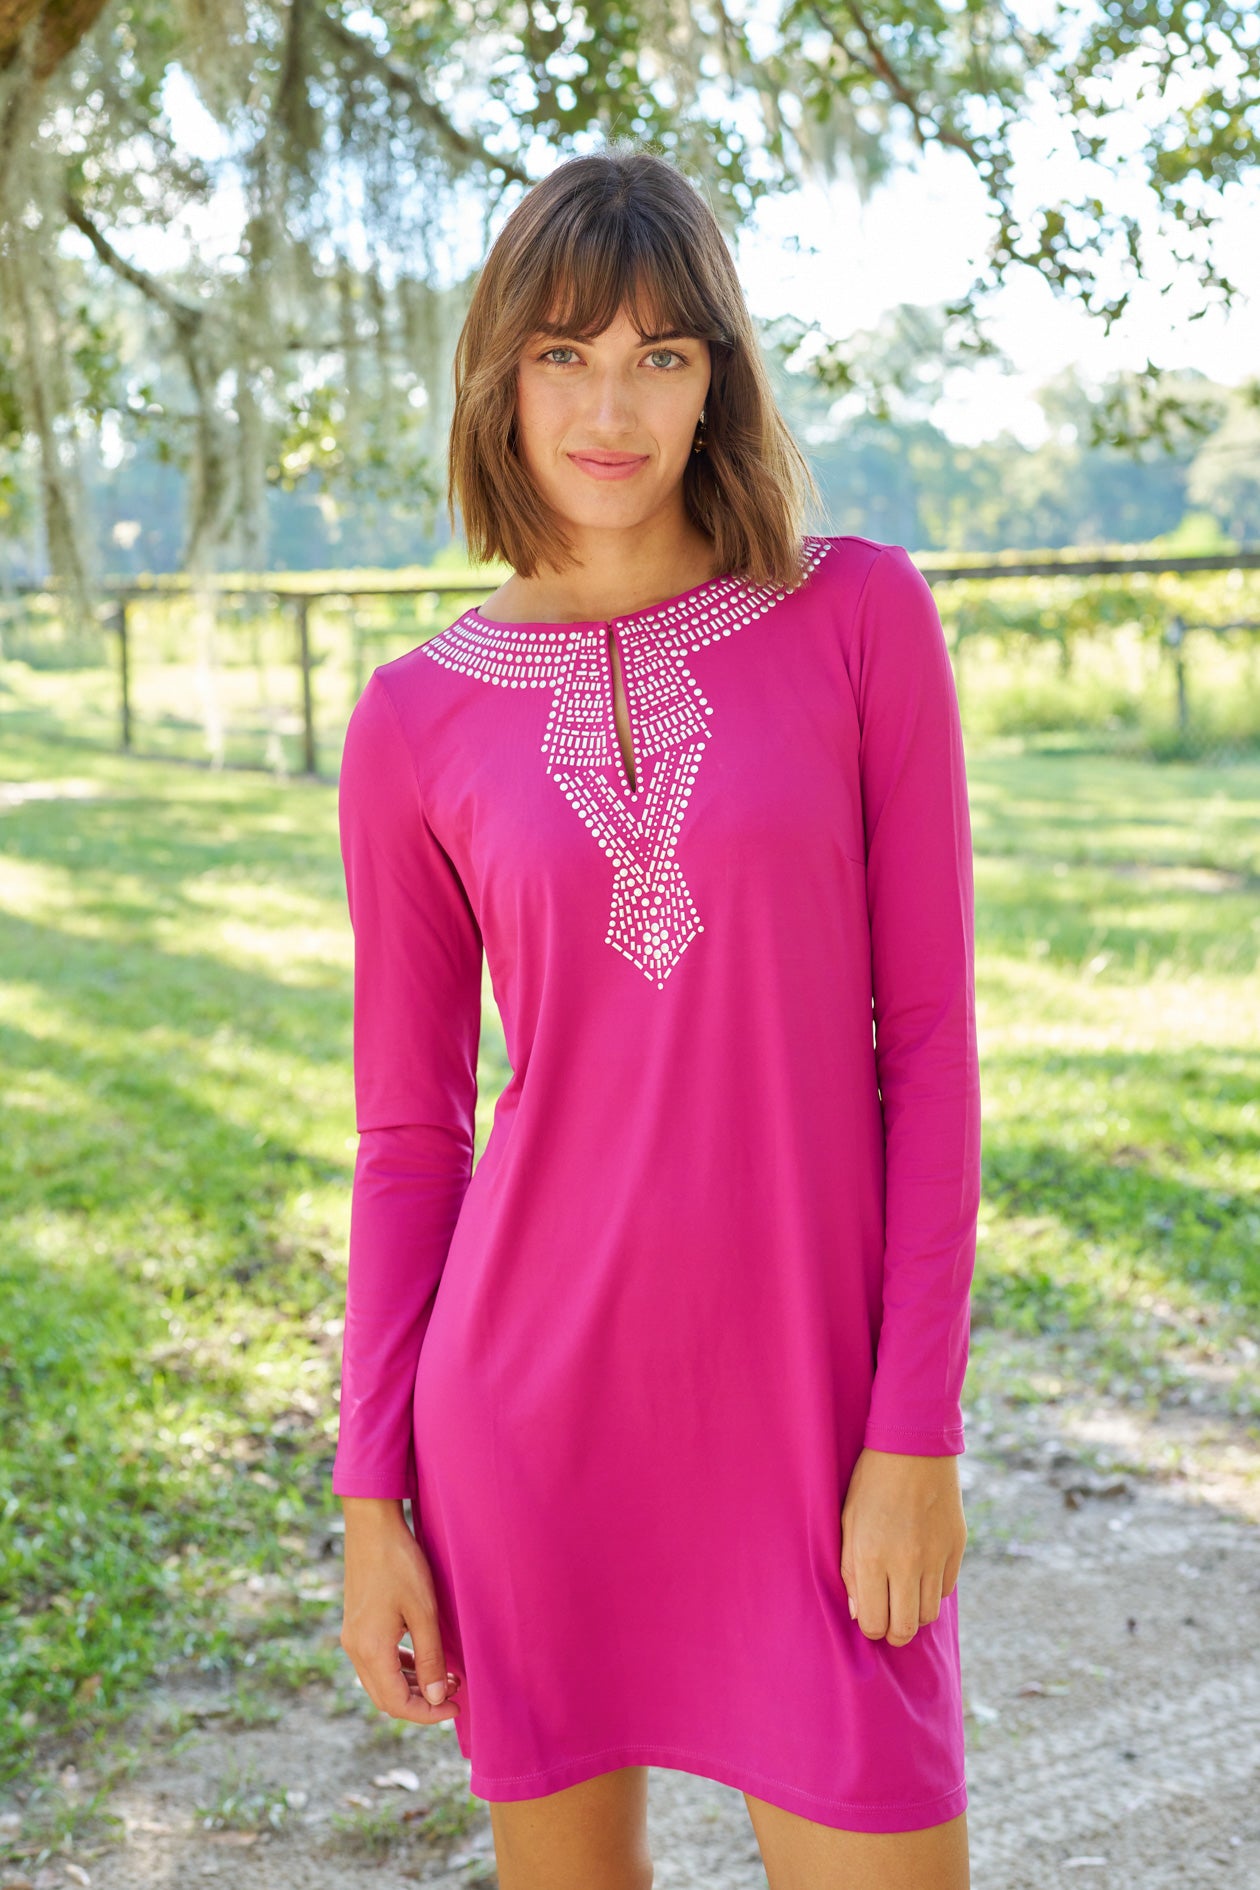 Brunette woman with short hair and bangs wearing Merlot Metallic Key Hole Dress.on a dirt road in front of a grassy field.